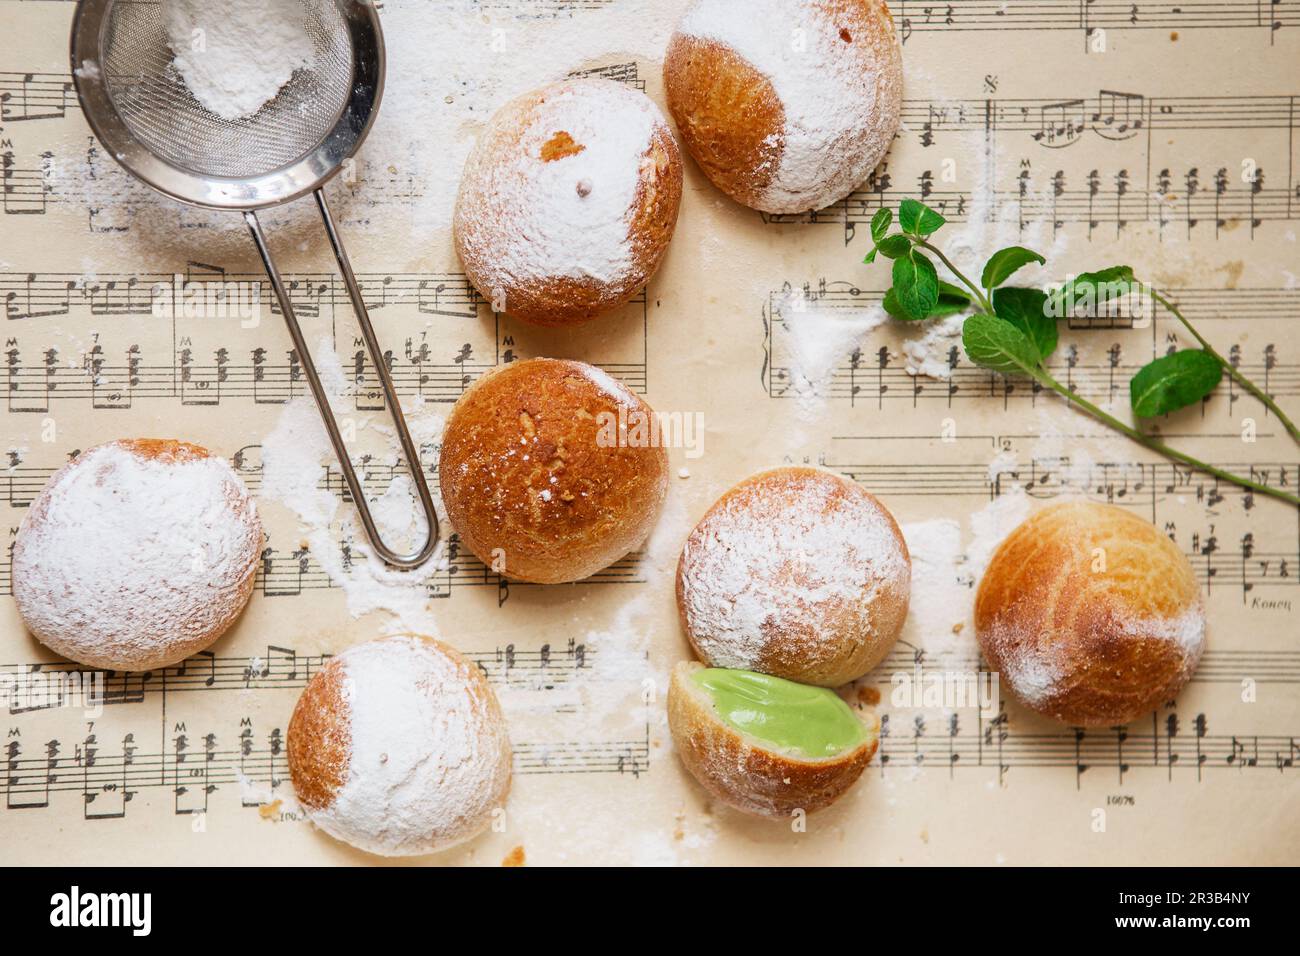 Homemade profiteroles on the music sheet with notes. Profiteroles (choux Ã  la crÃ¨me) - French choux Stock Photo